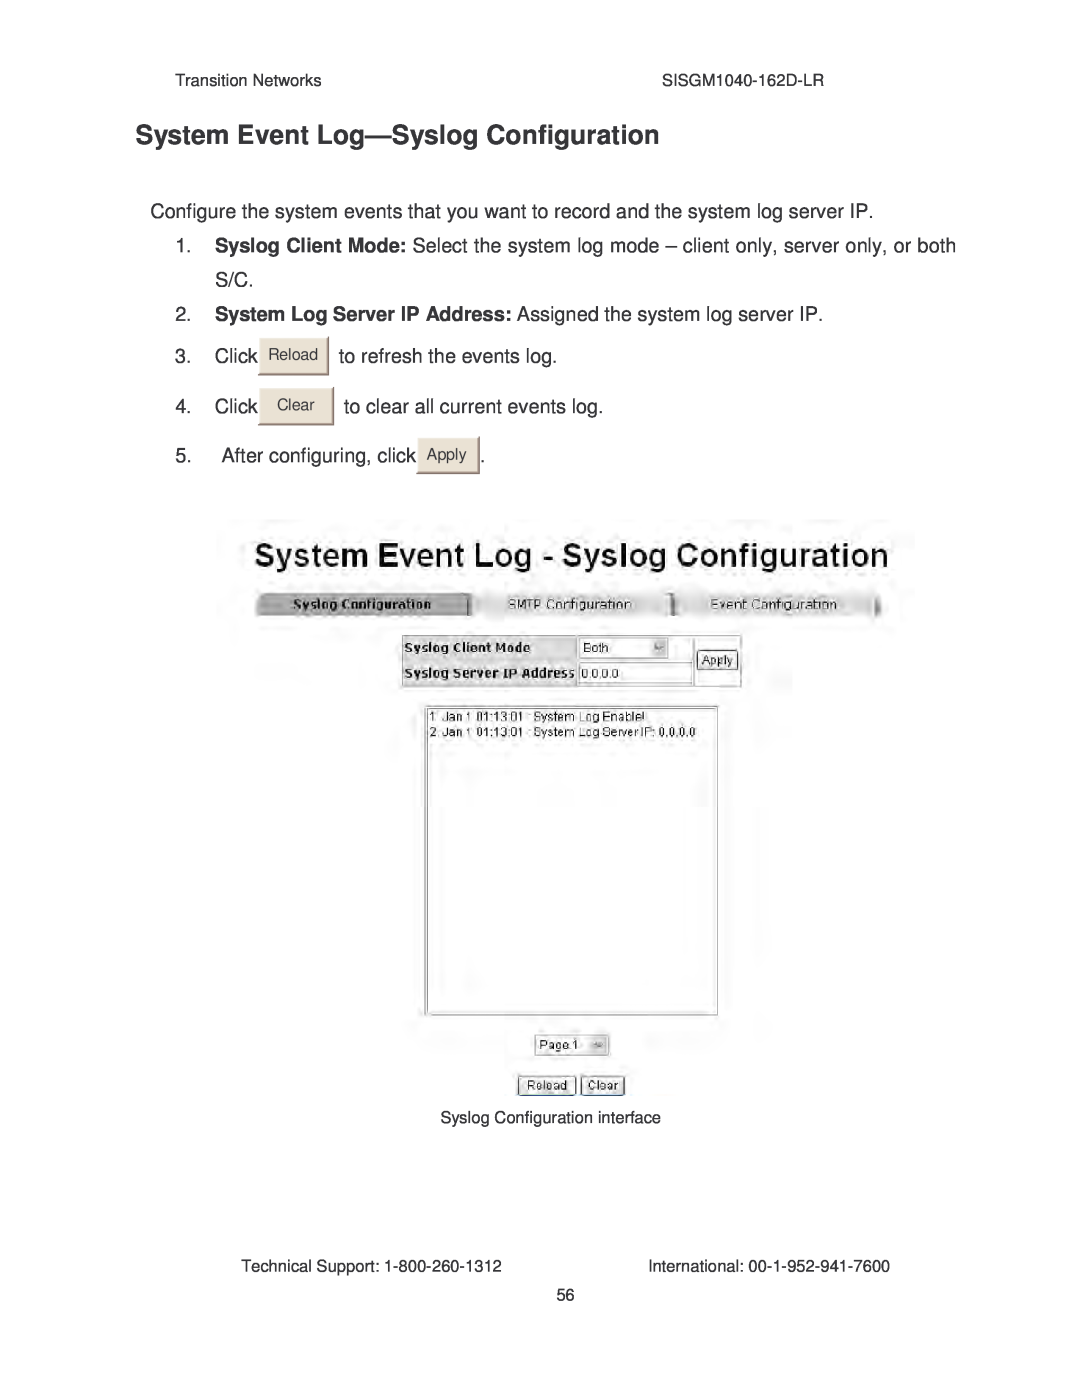 Transition Networks SISGM1040-162D manual System Event Log-Syslog Configuration 